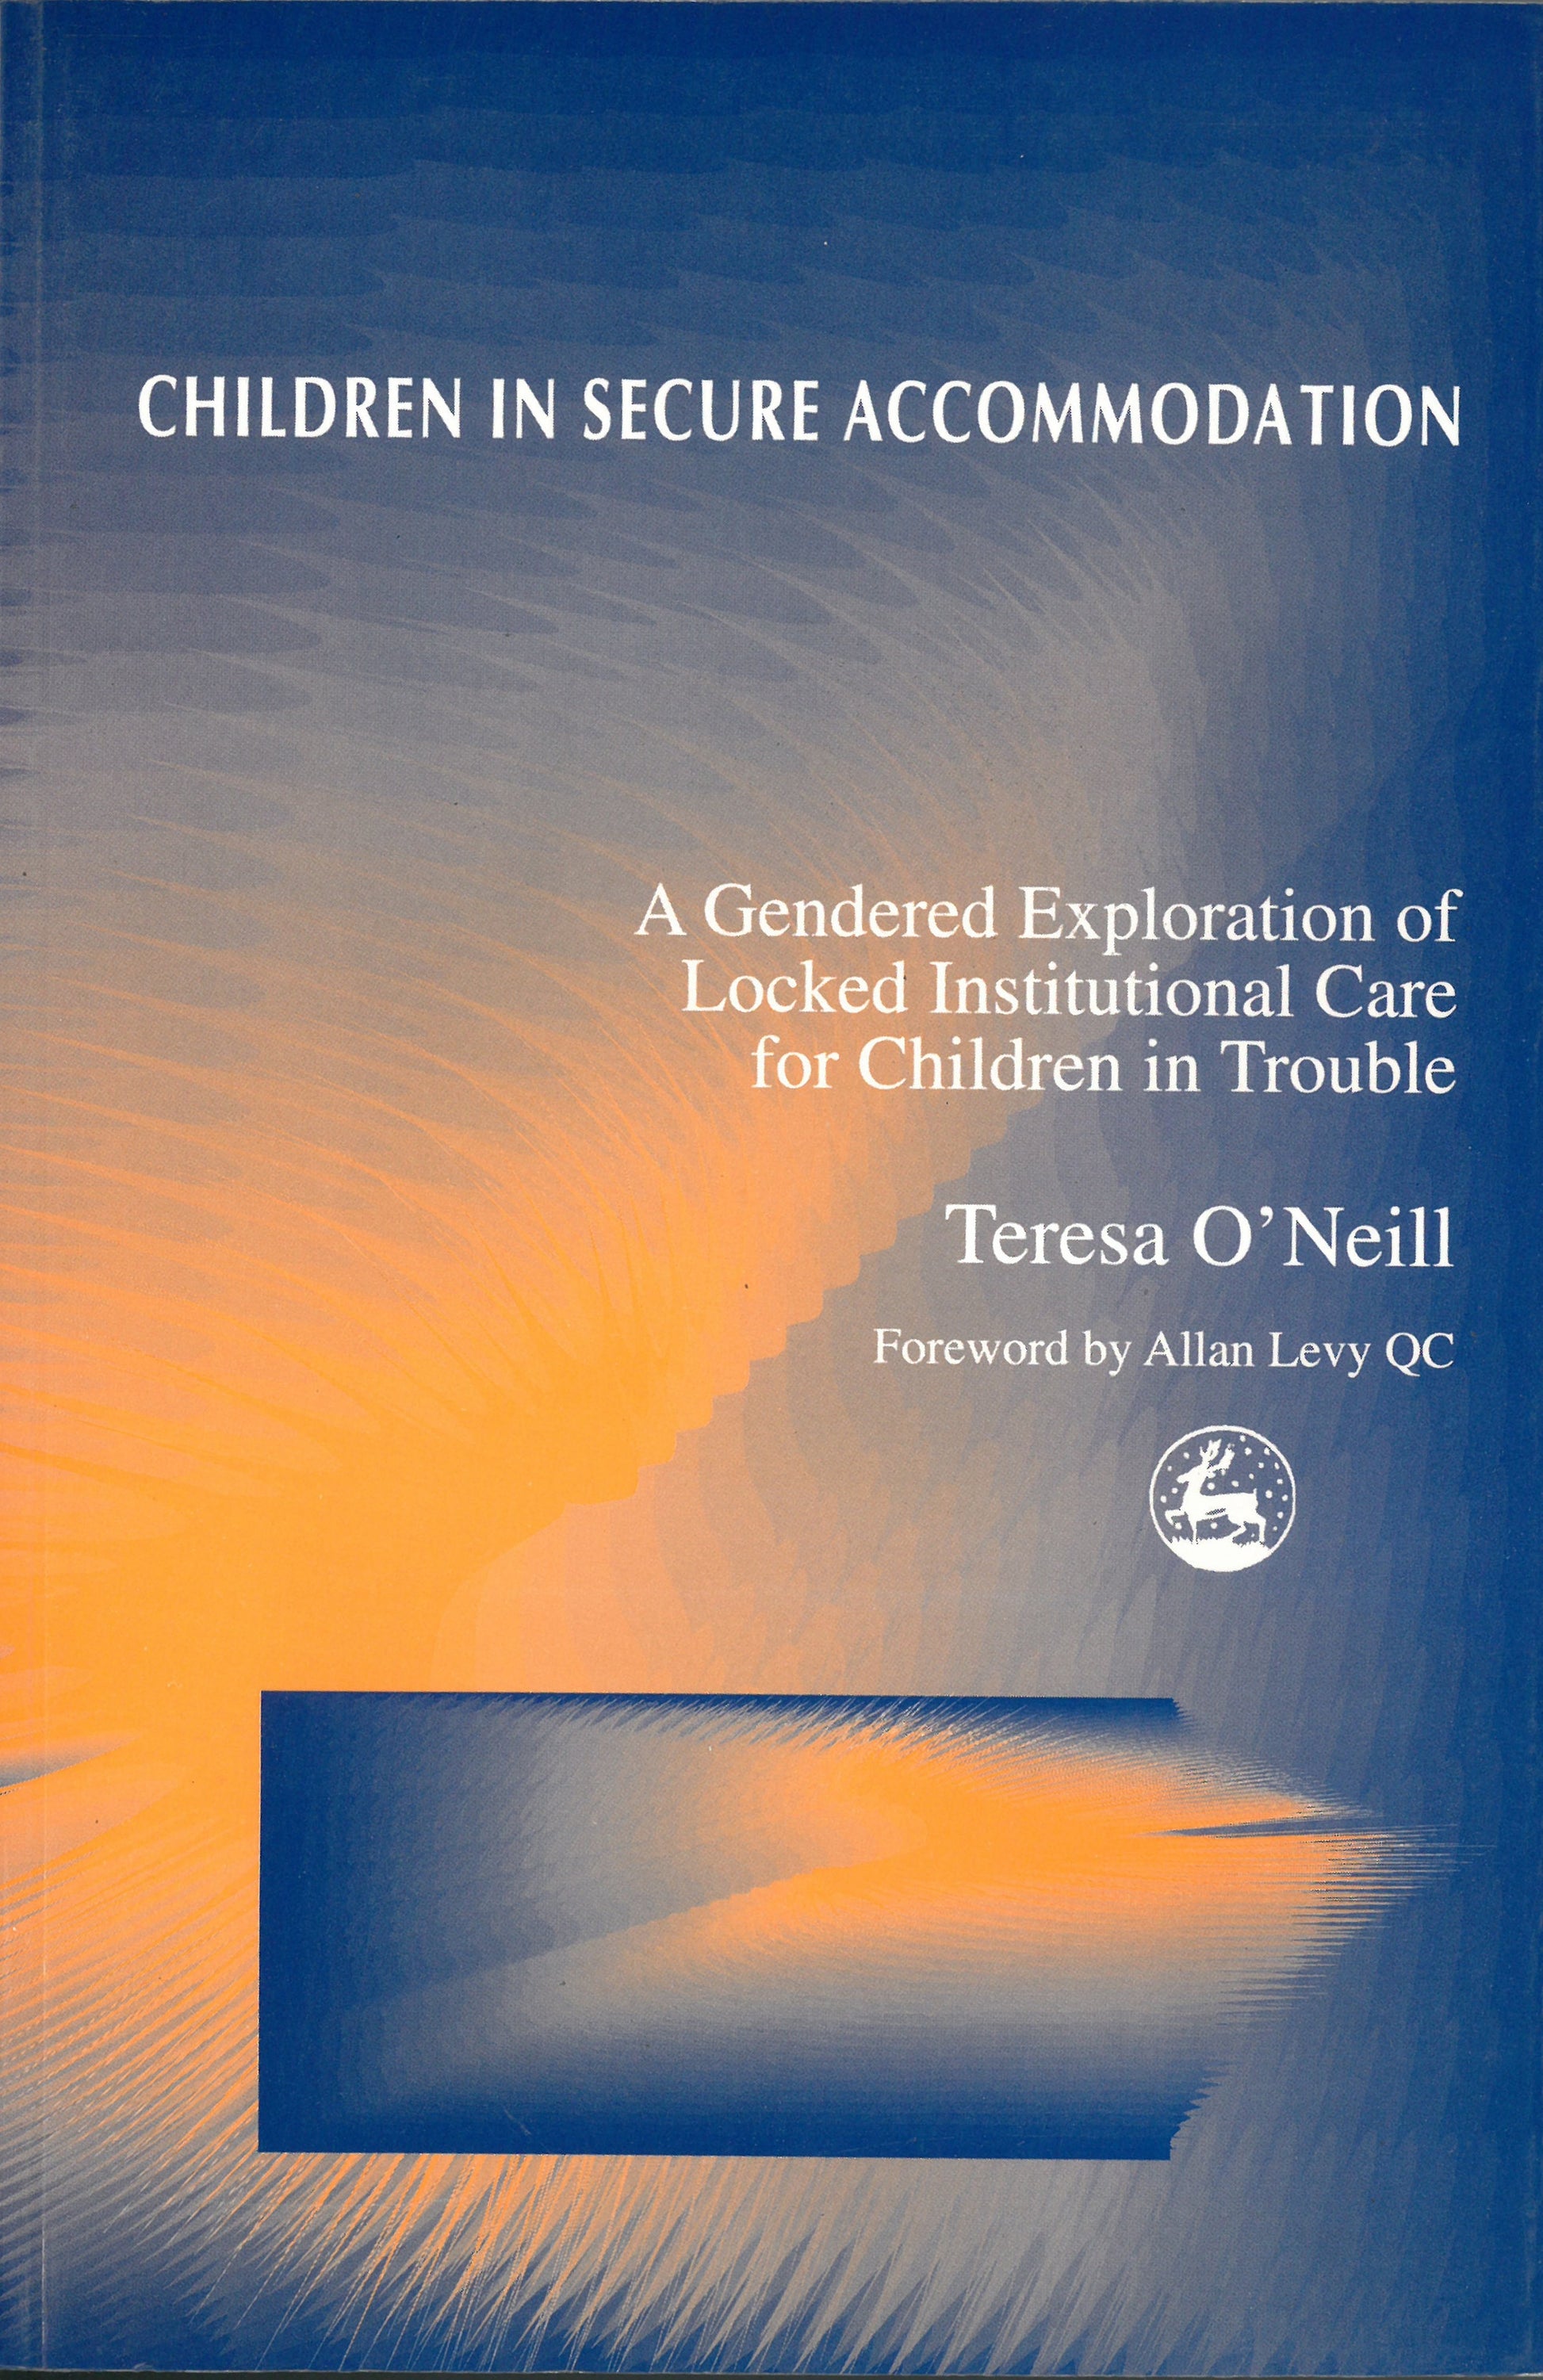 Children in Secure Accommodation by Teresa O'Neill, Teresa O''Neill